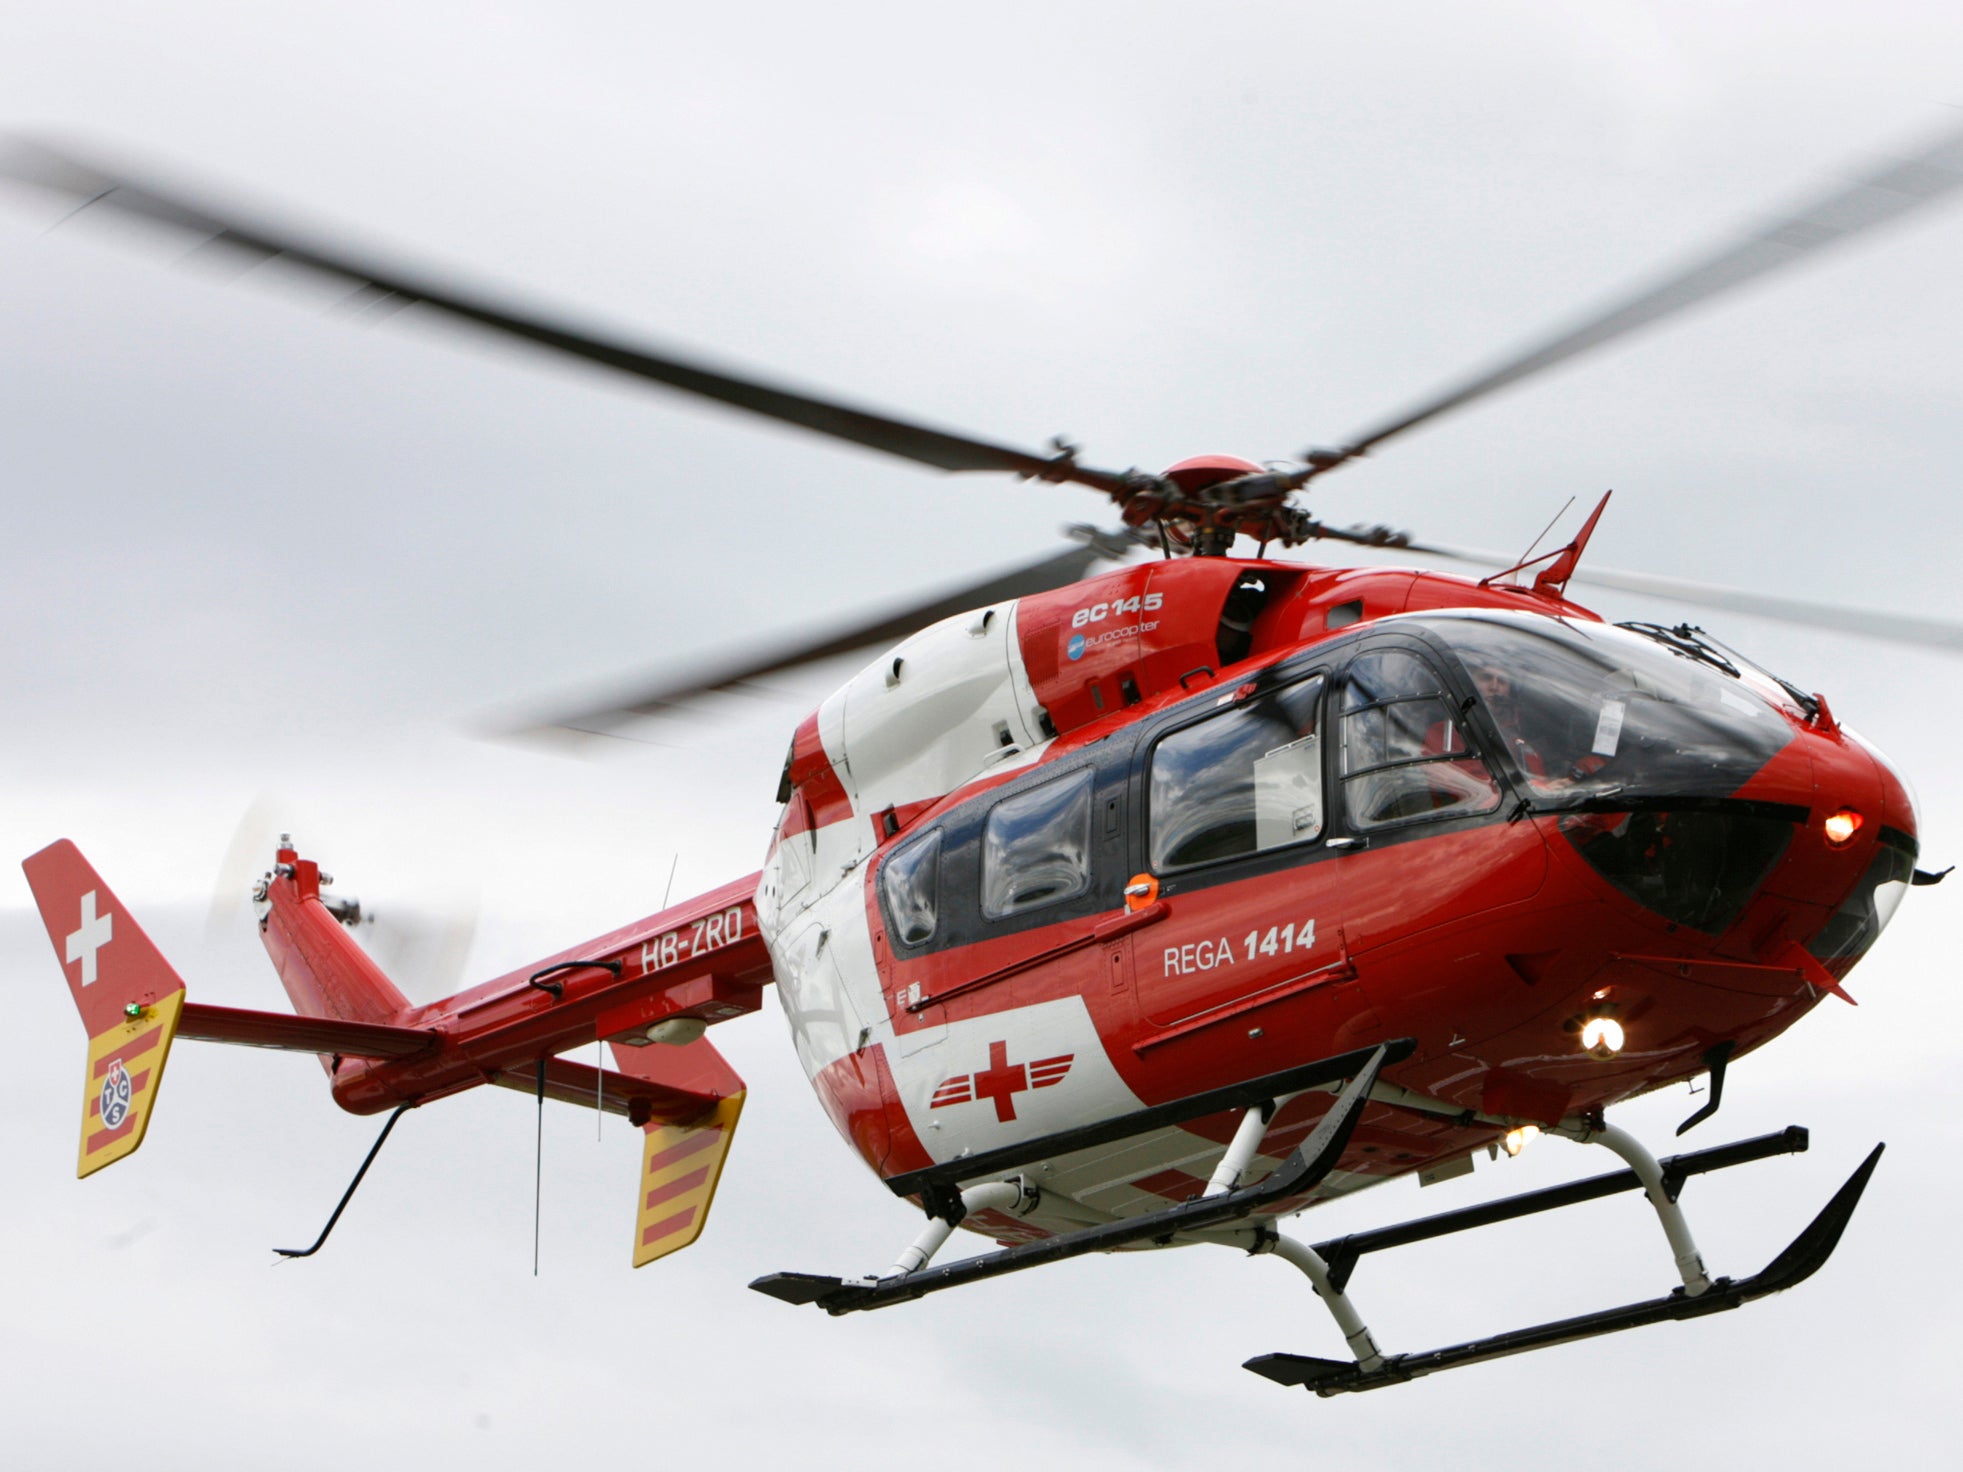 Victim was transported by helicopter to University Hospital Zurich, where he died